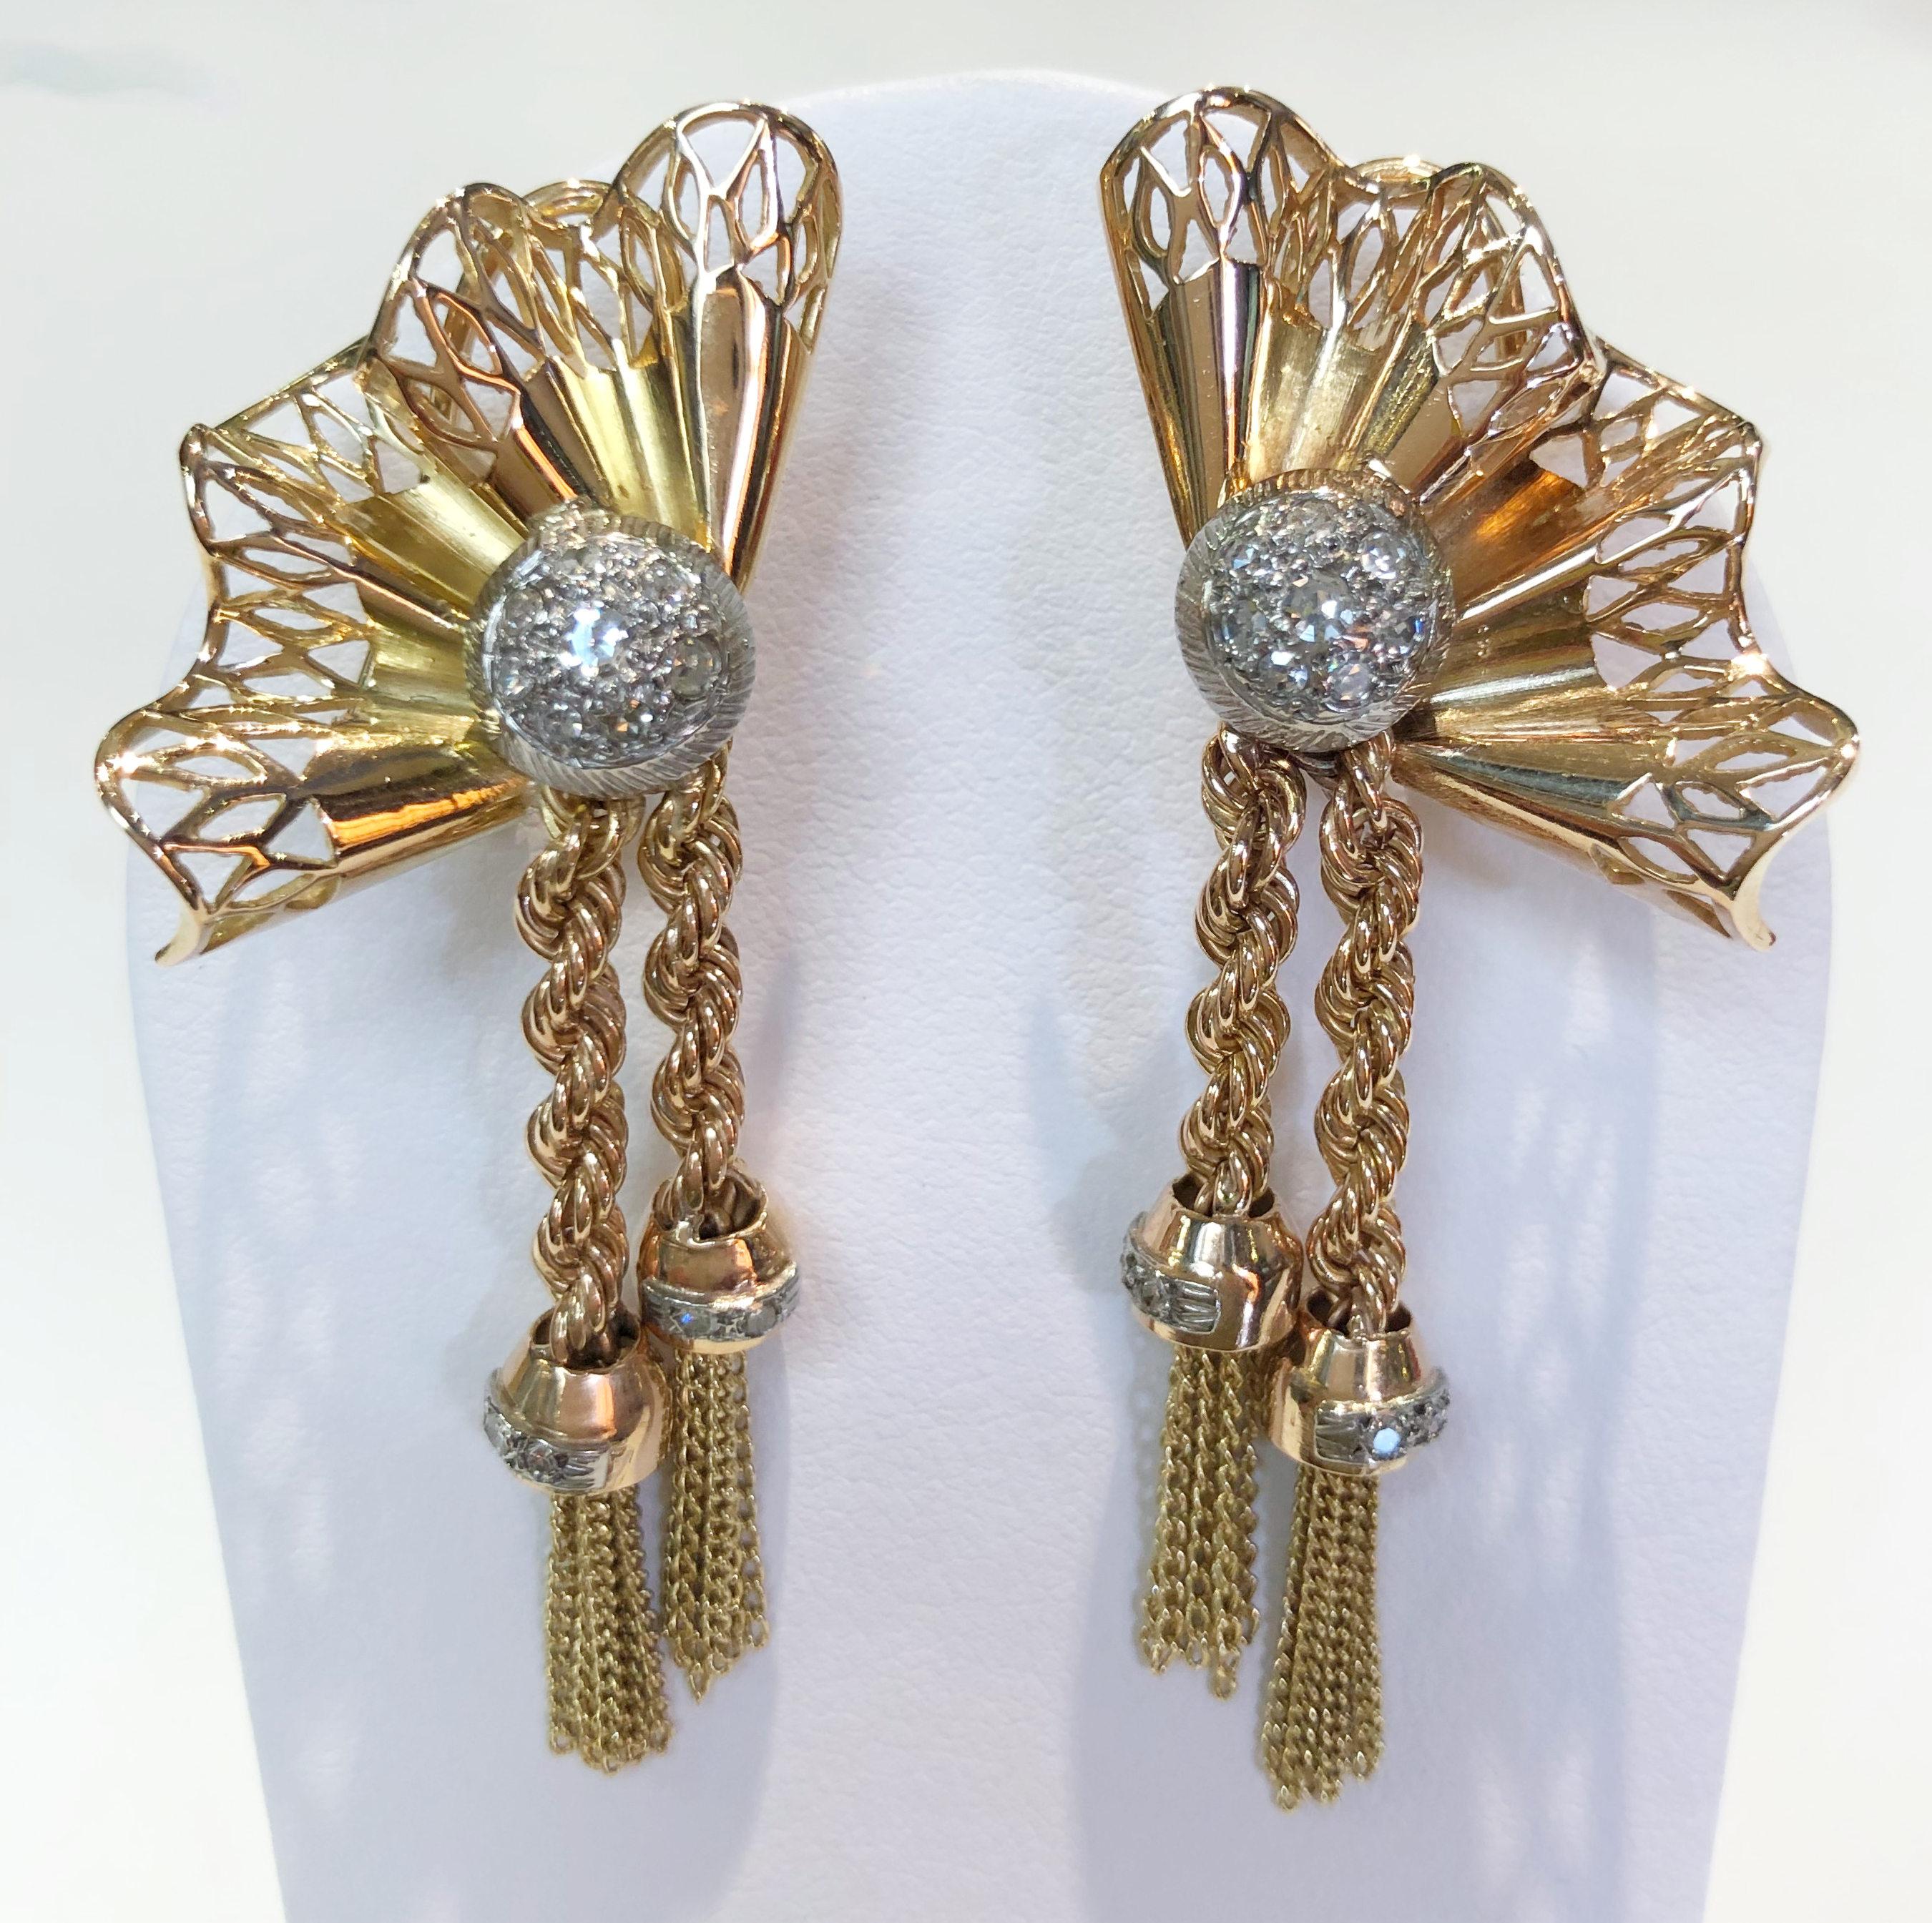 Pair of vintage 18 karat rose gold earrings, with gold bows and brilliant diamonds in the center and also on the fringes, Italy 1940s
Length 5.5cm
A matching necklace is available